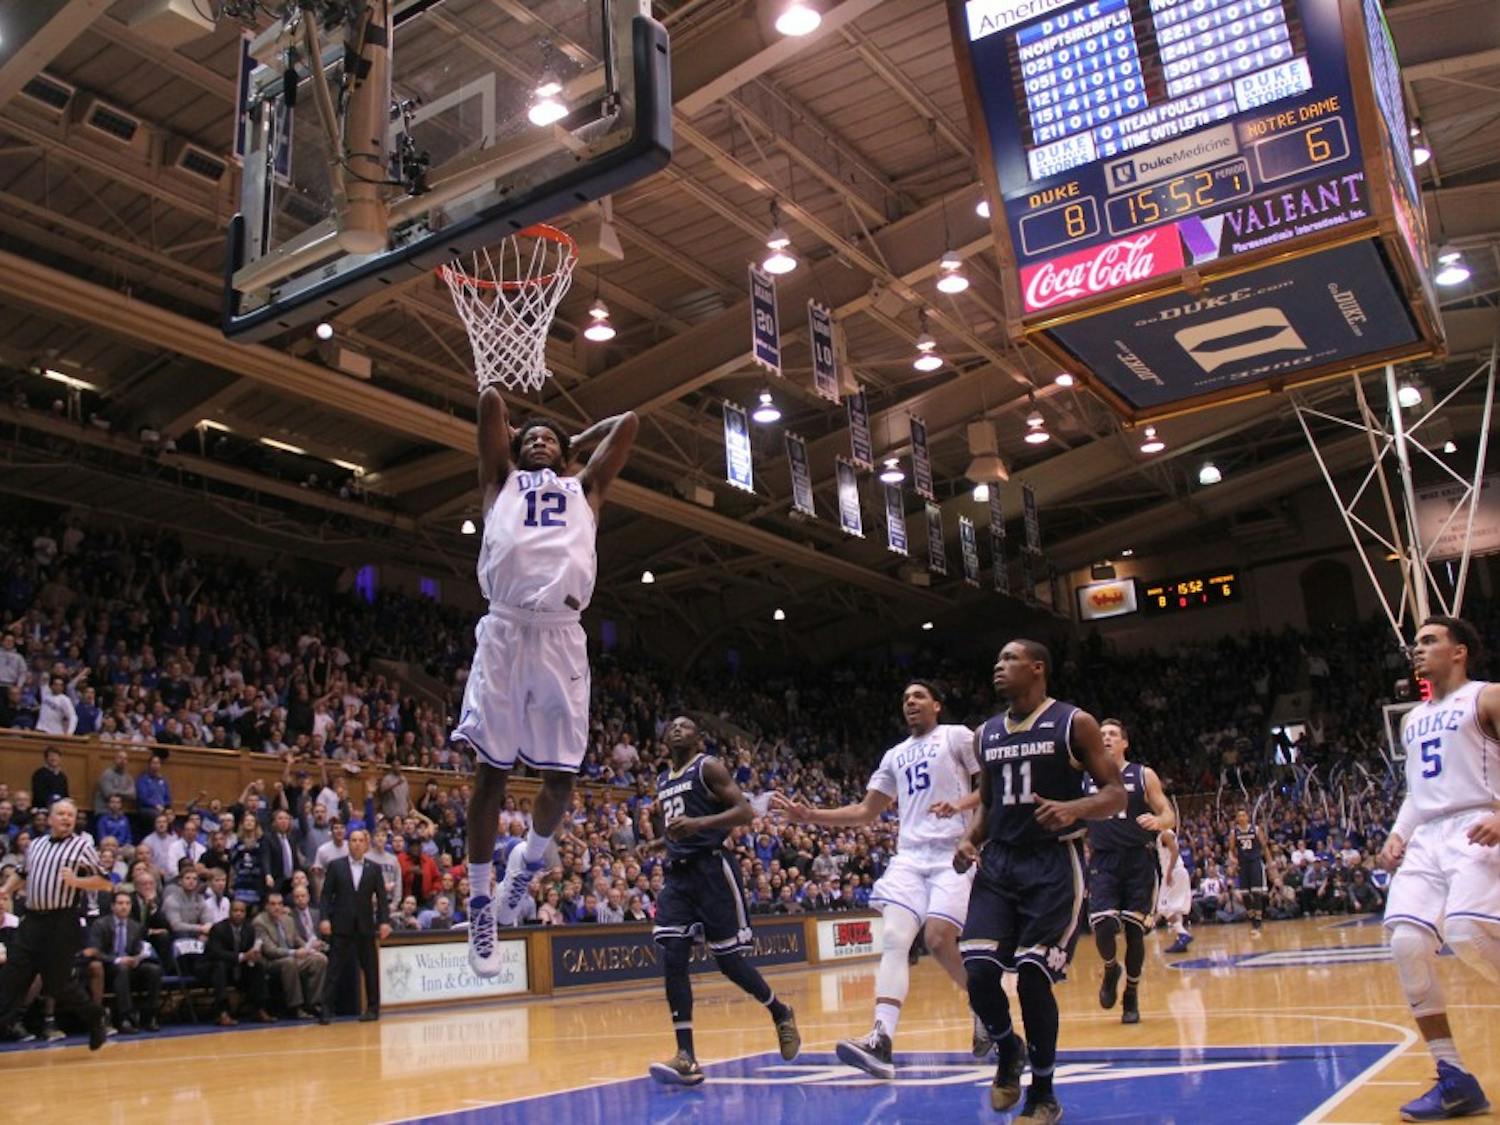 Justise Winslow notched his third consecutive double-double as Duke dominated Notre Dame Saturday afternoon.